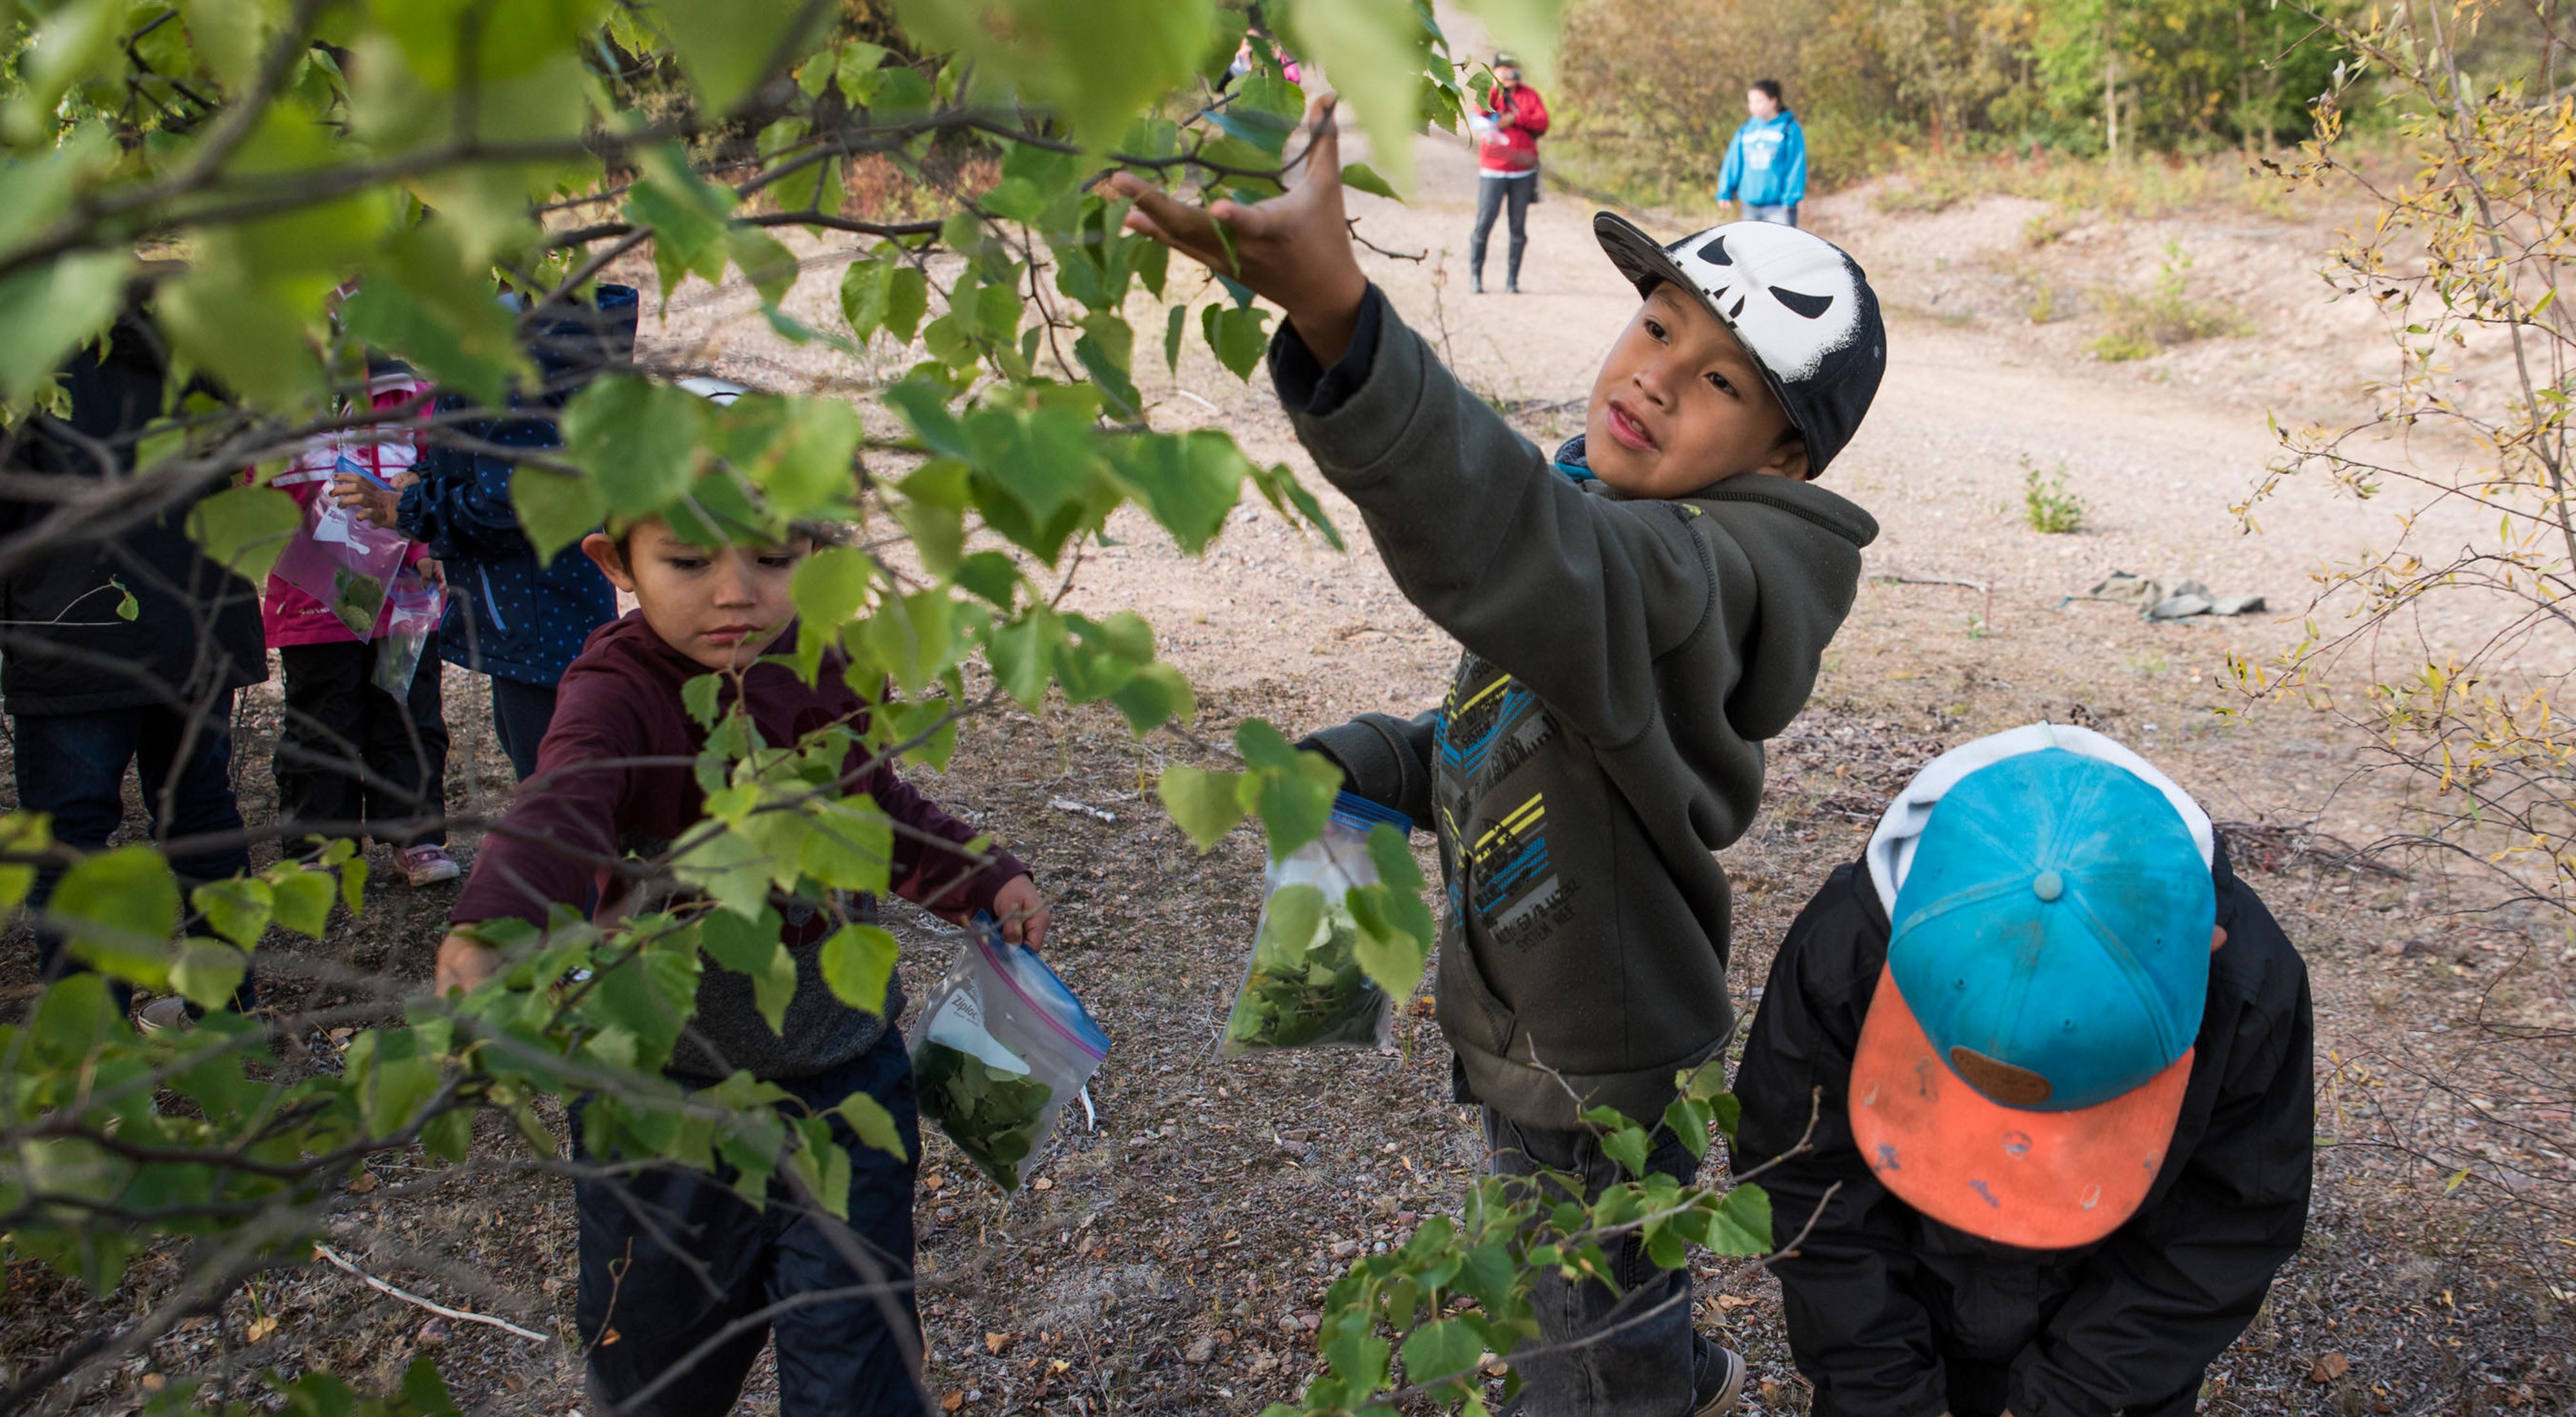 Children from the Łutsël K’é Dene First Nation in the Northwest Territories enjoy a day exploring outdoors in their traditional territory.